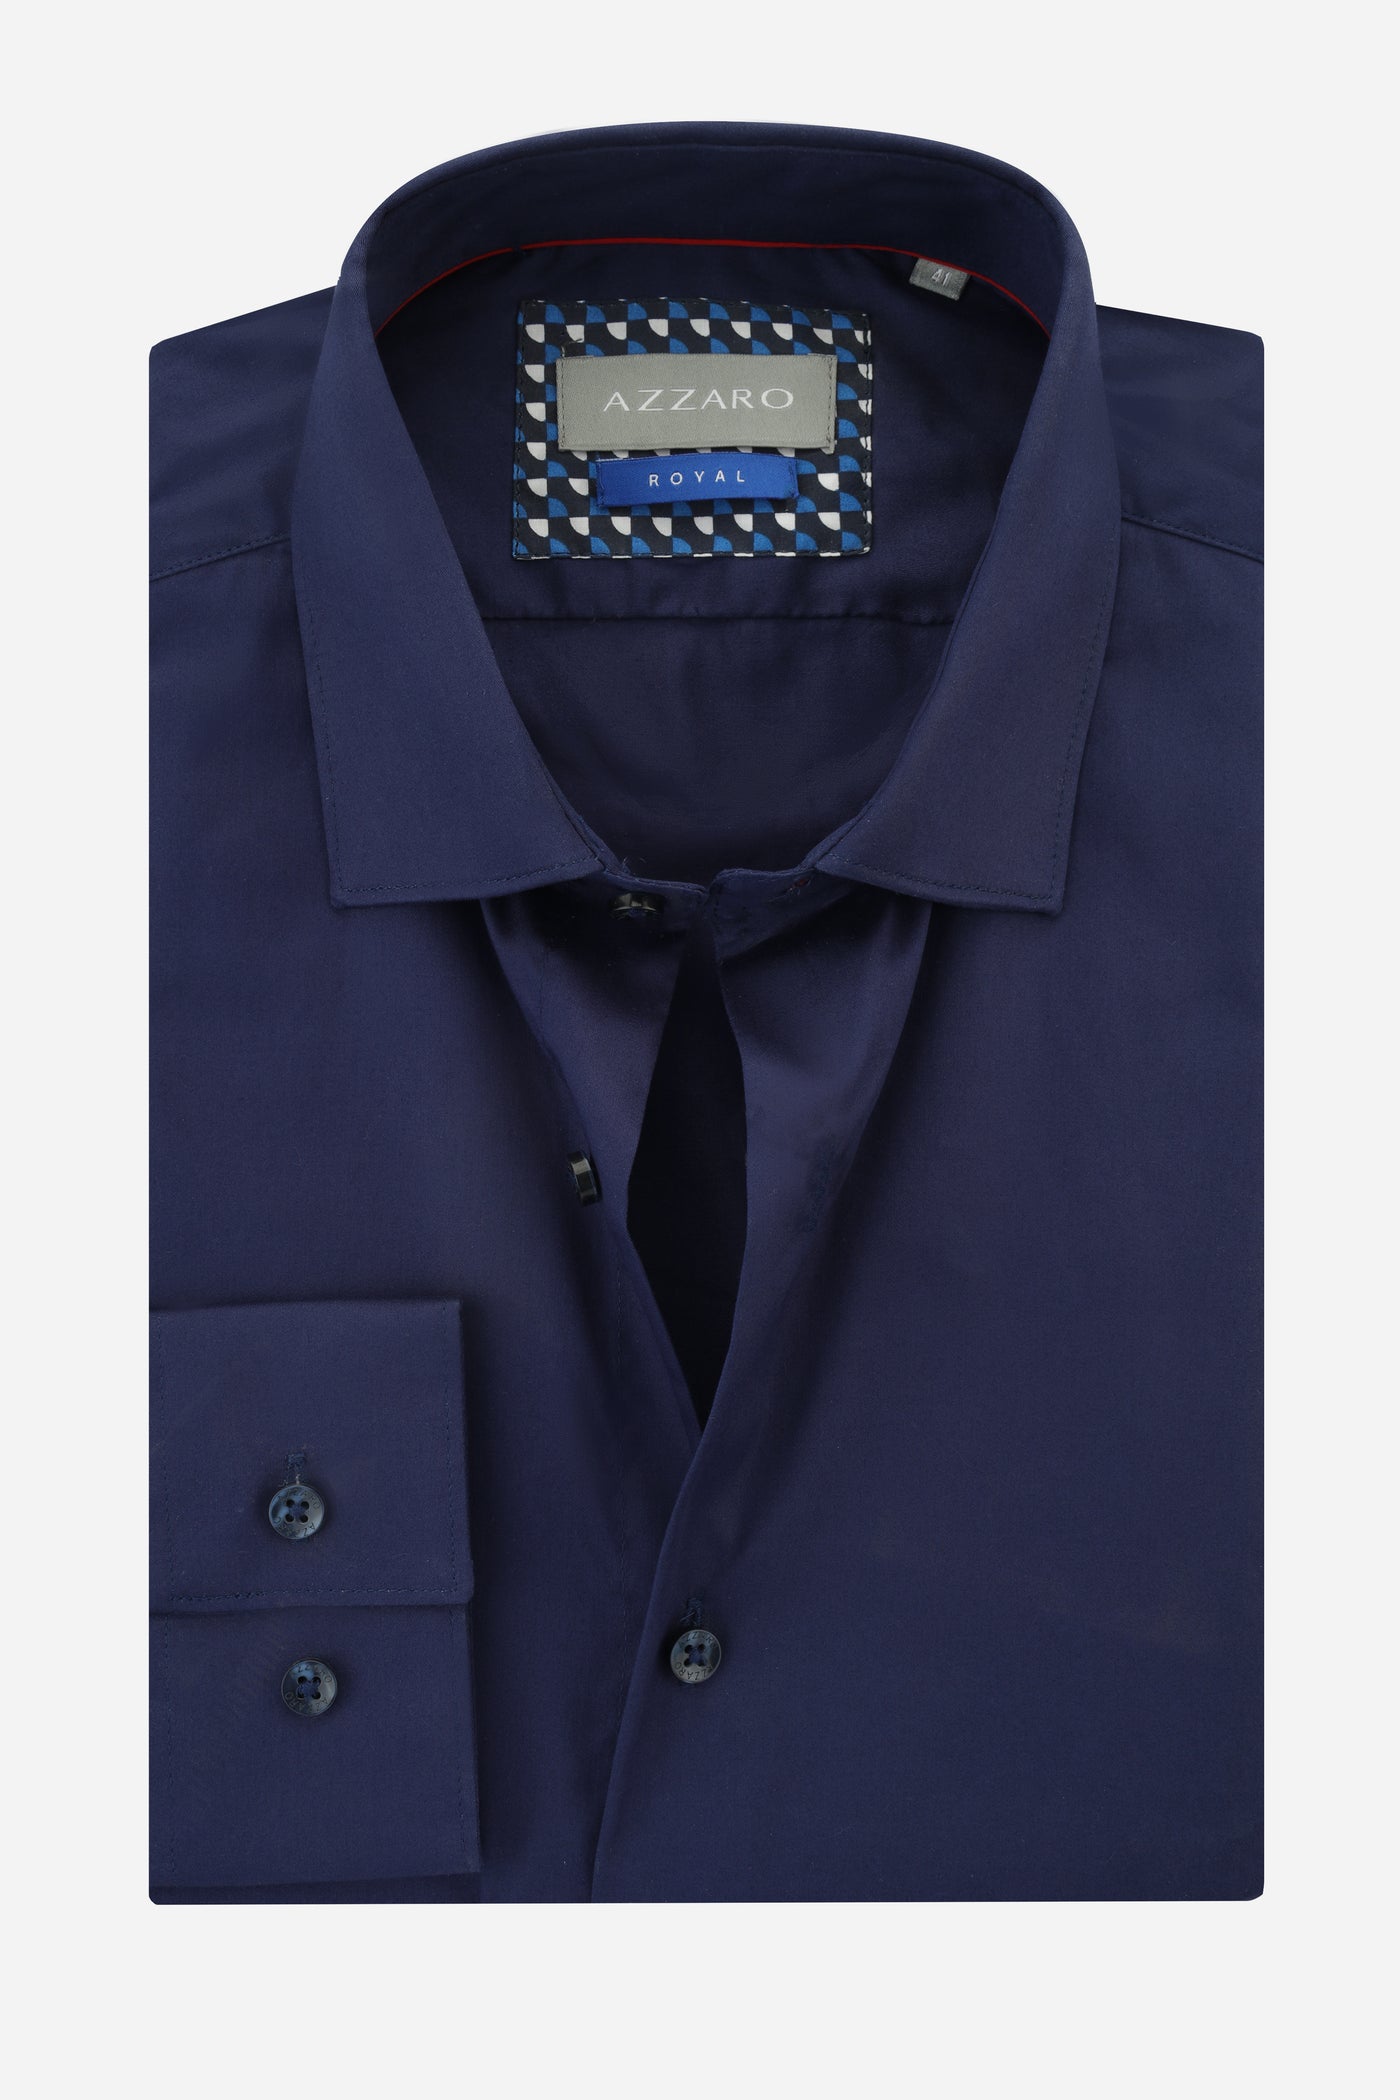 Solid Navy Smart Casual Shirt